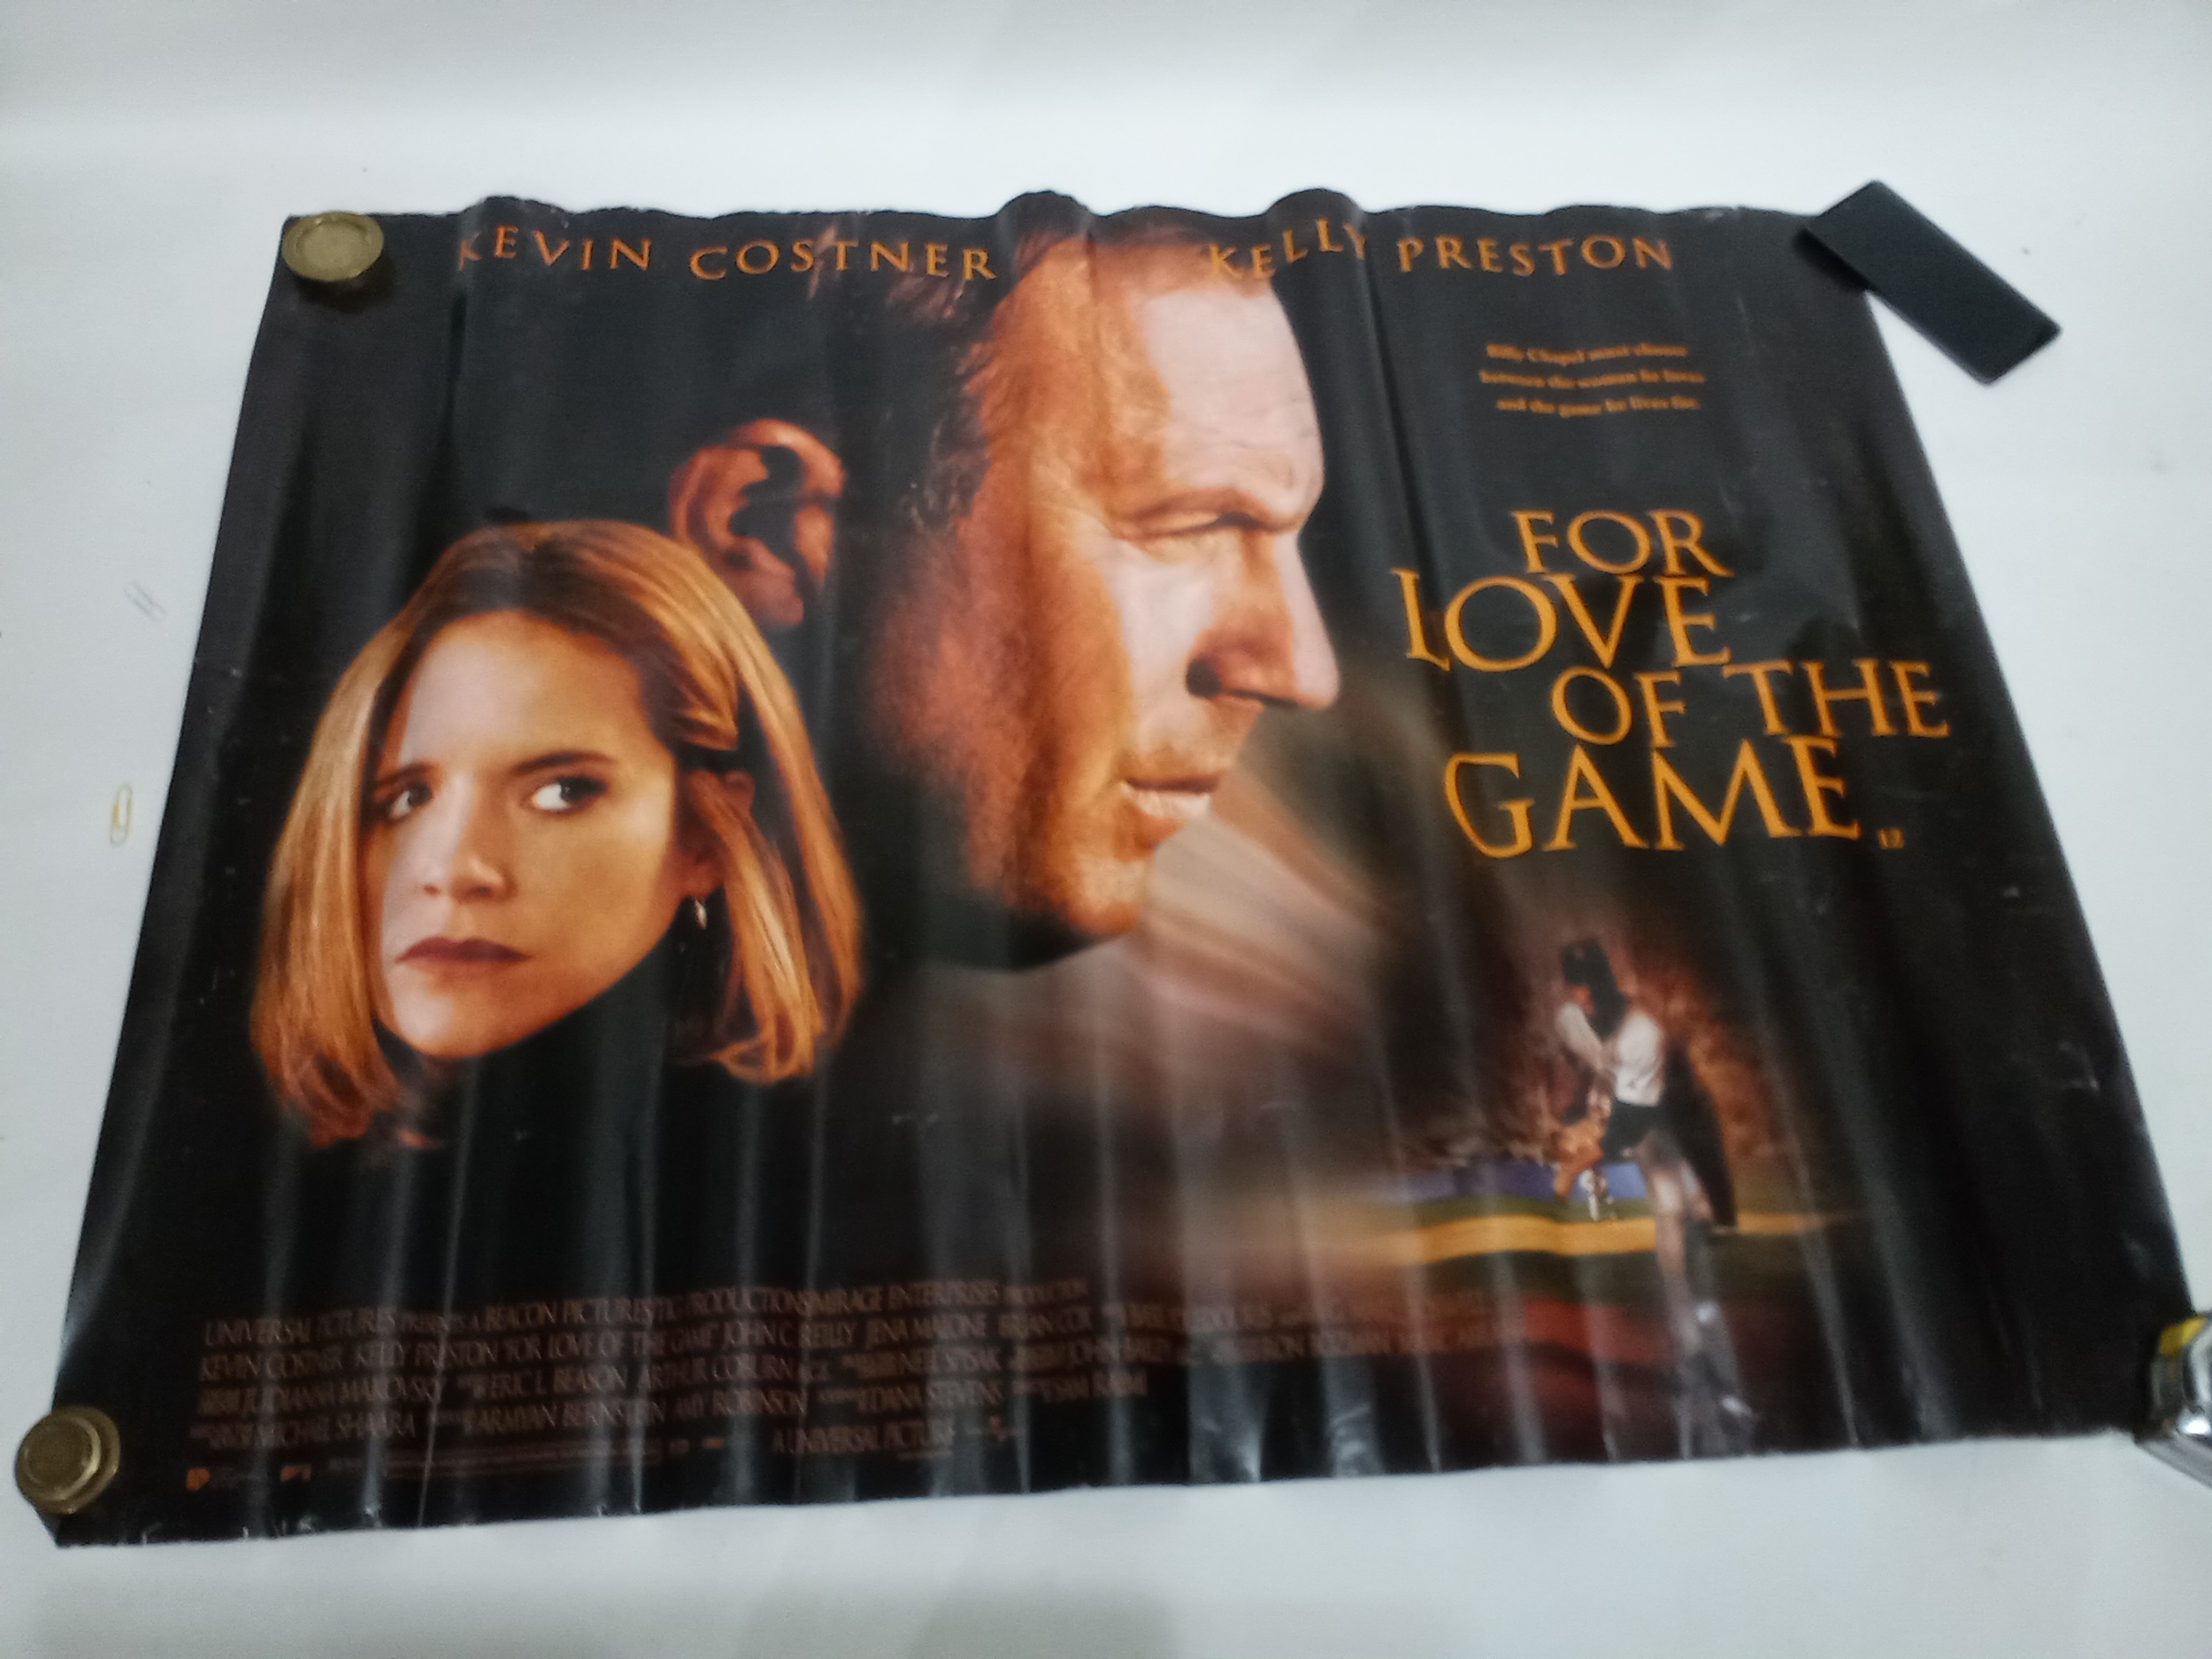 For Love of the Game - Publicity still of Kevin Costner & Kelly Preston